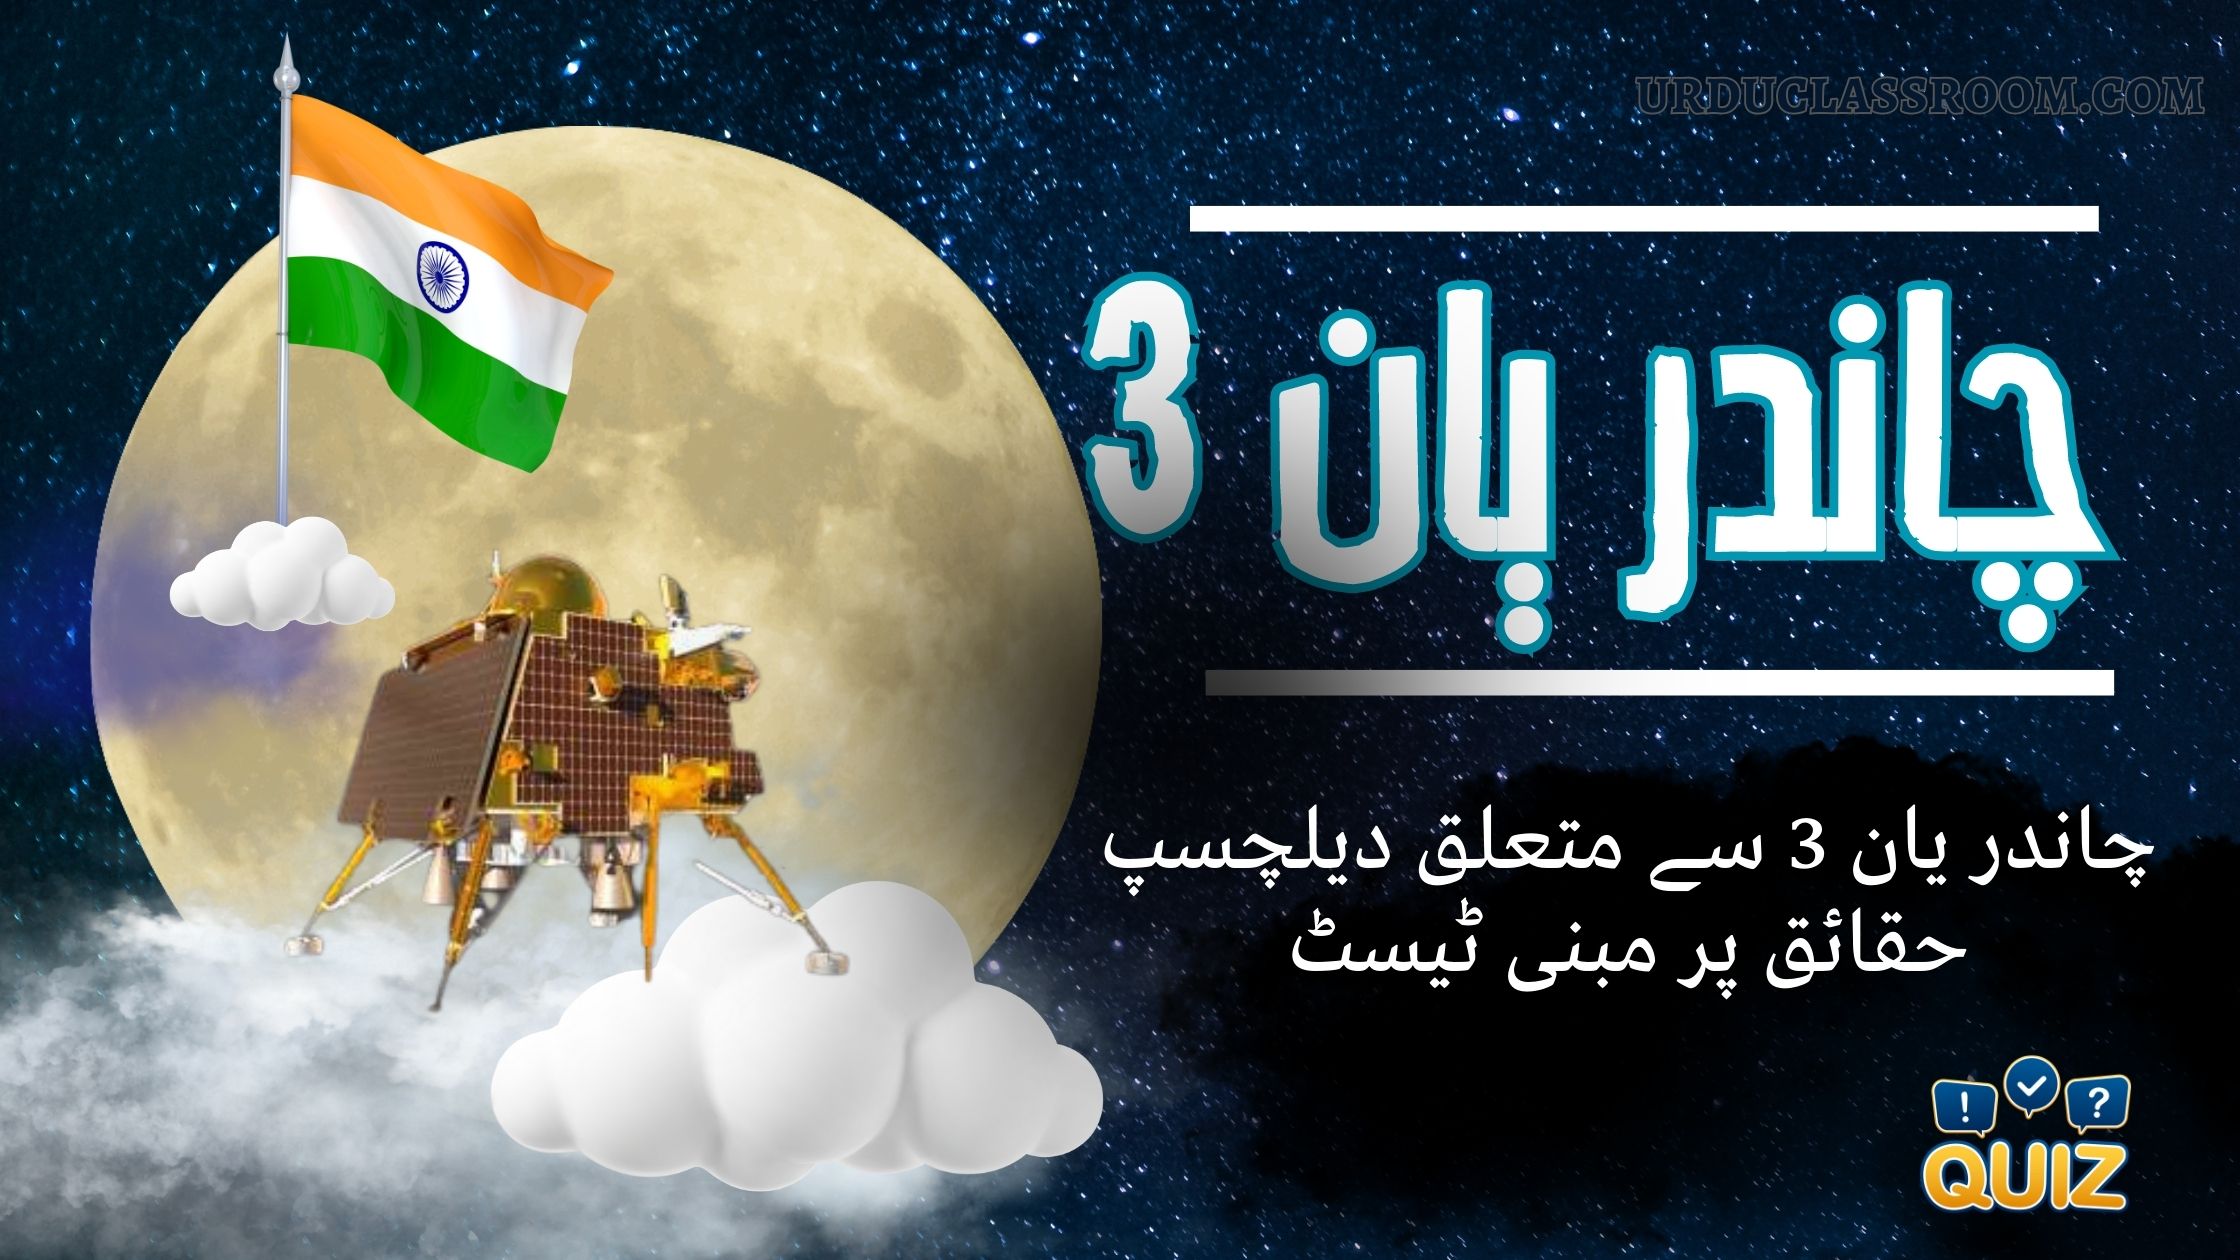 Top 10 Facts About Chandrayaan-3 with urdu quiz